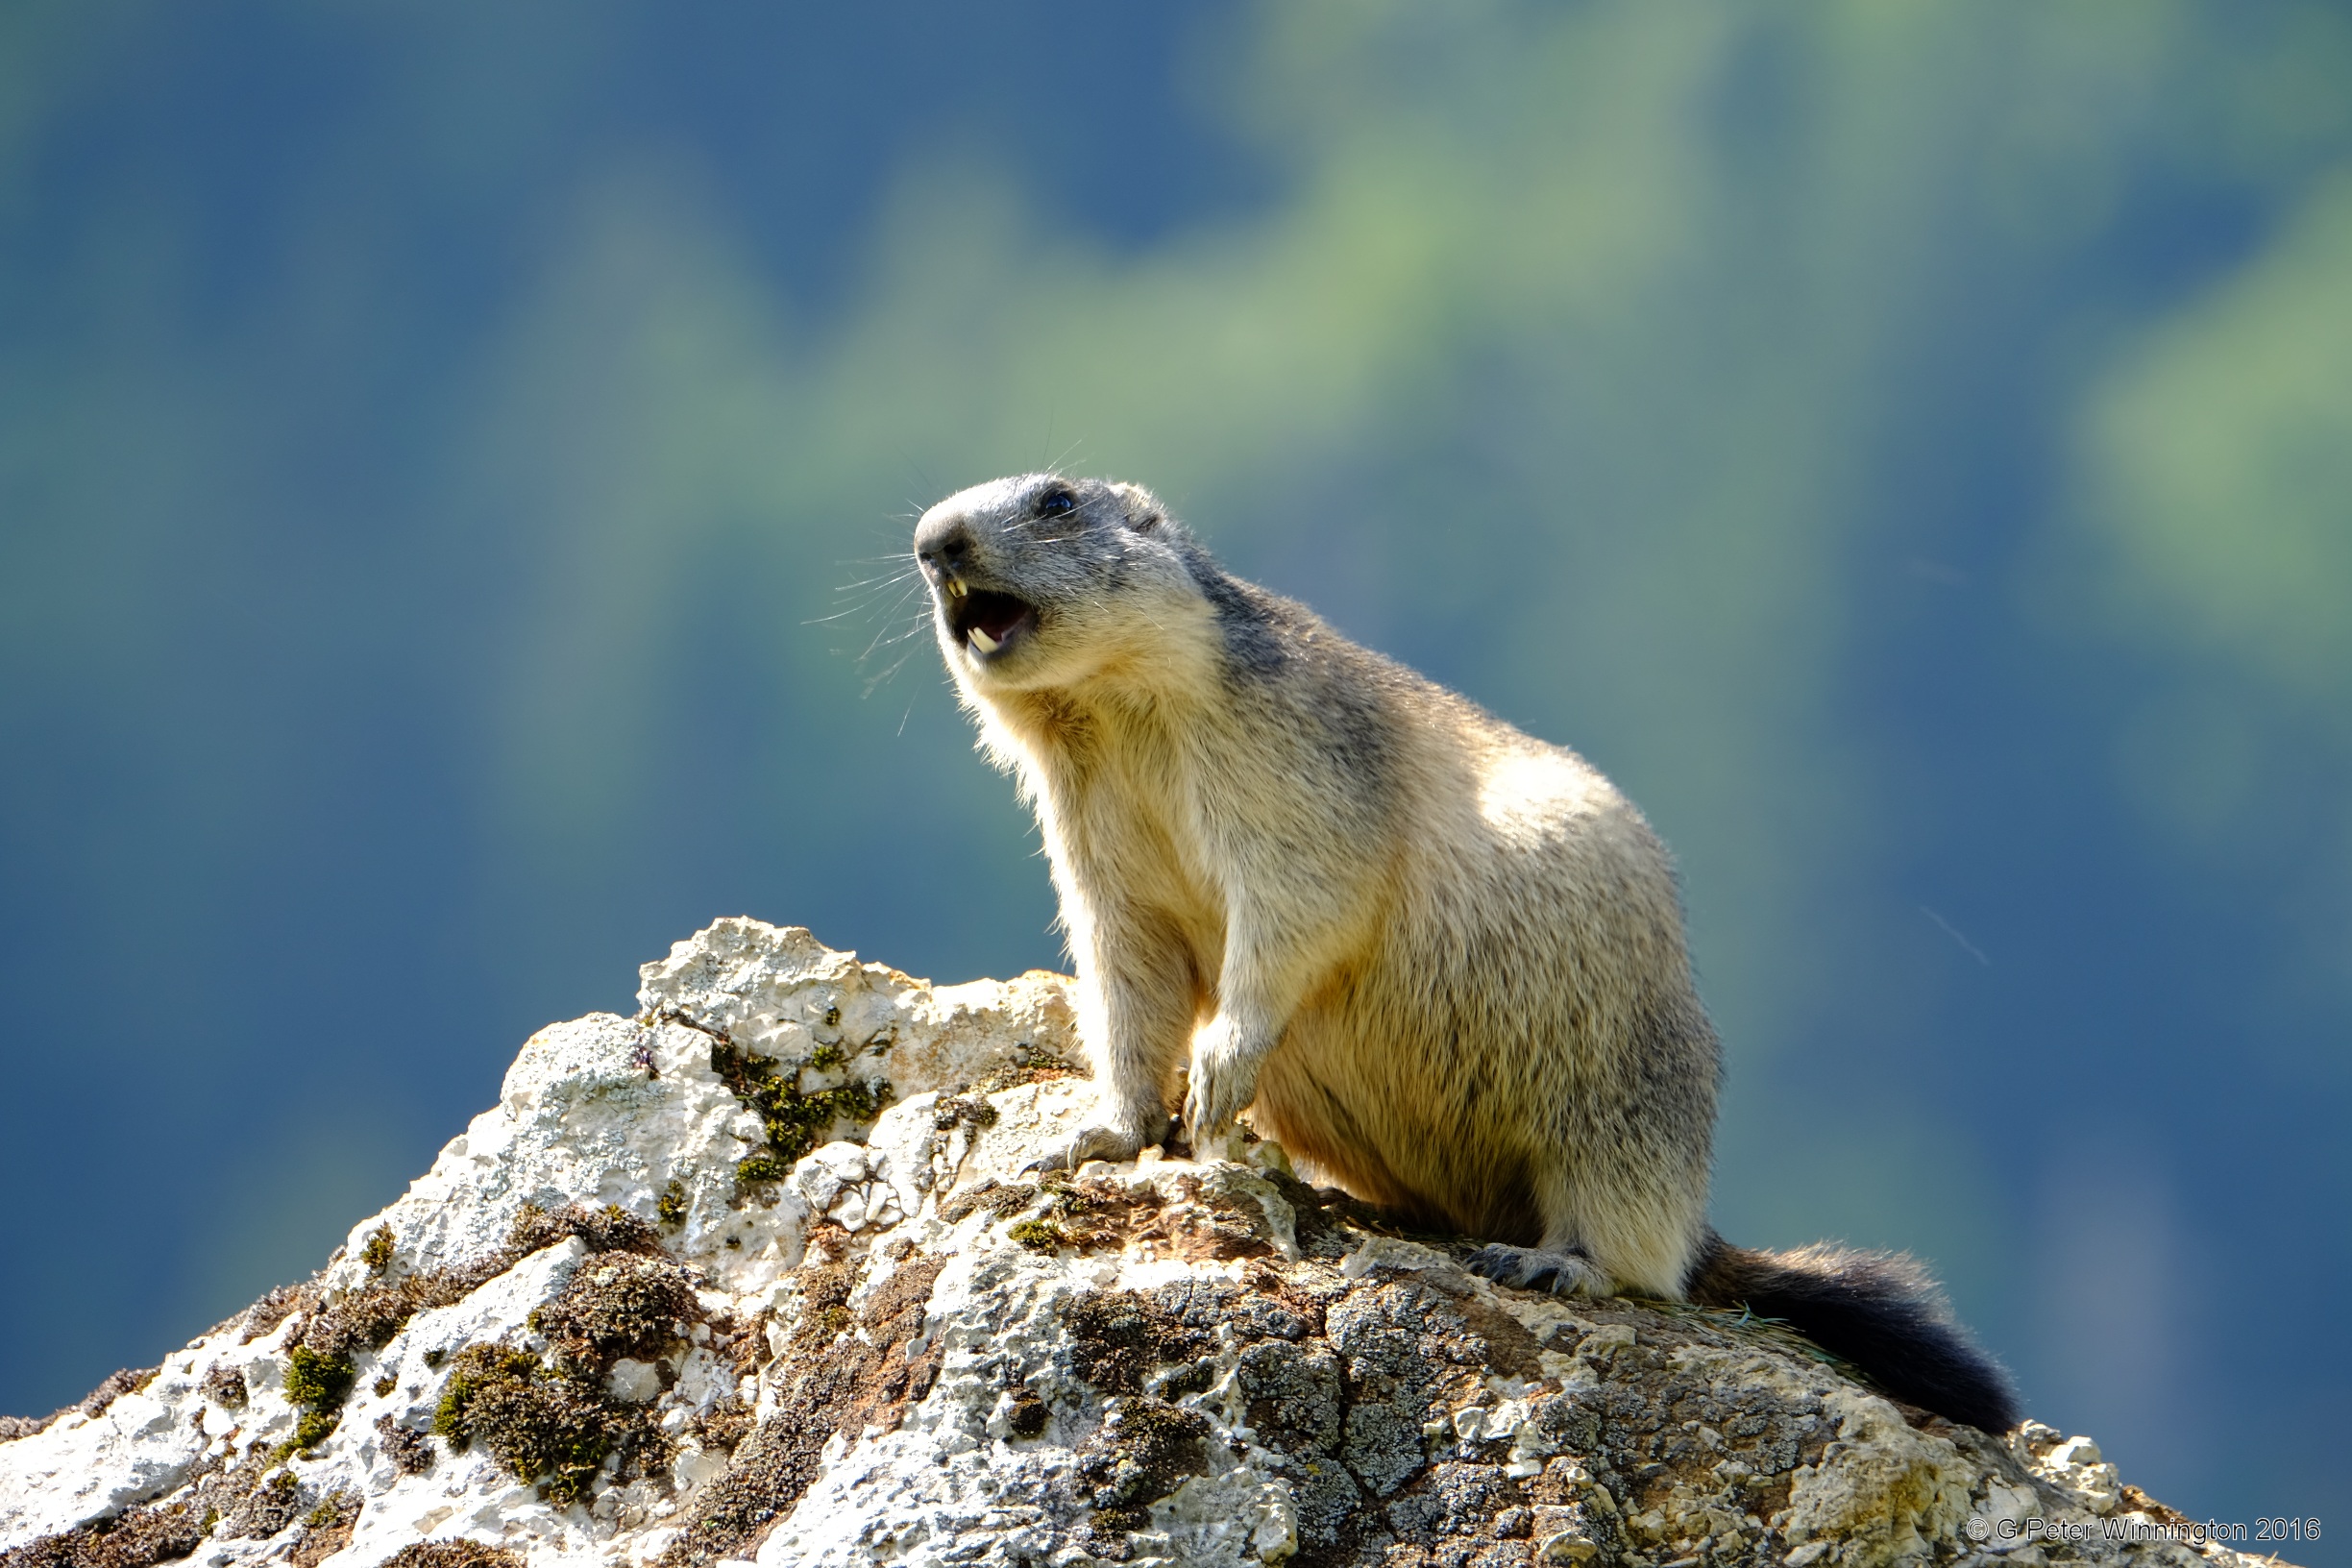 Marmot shows its teeth as it whistles